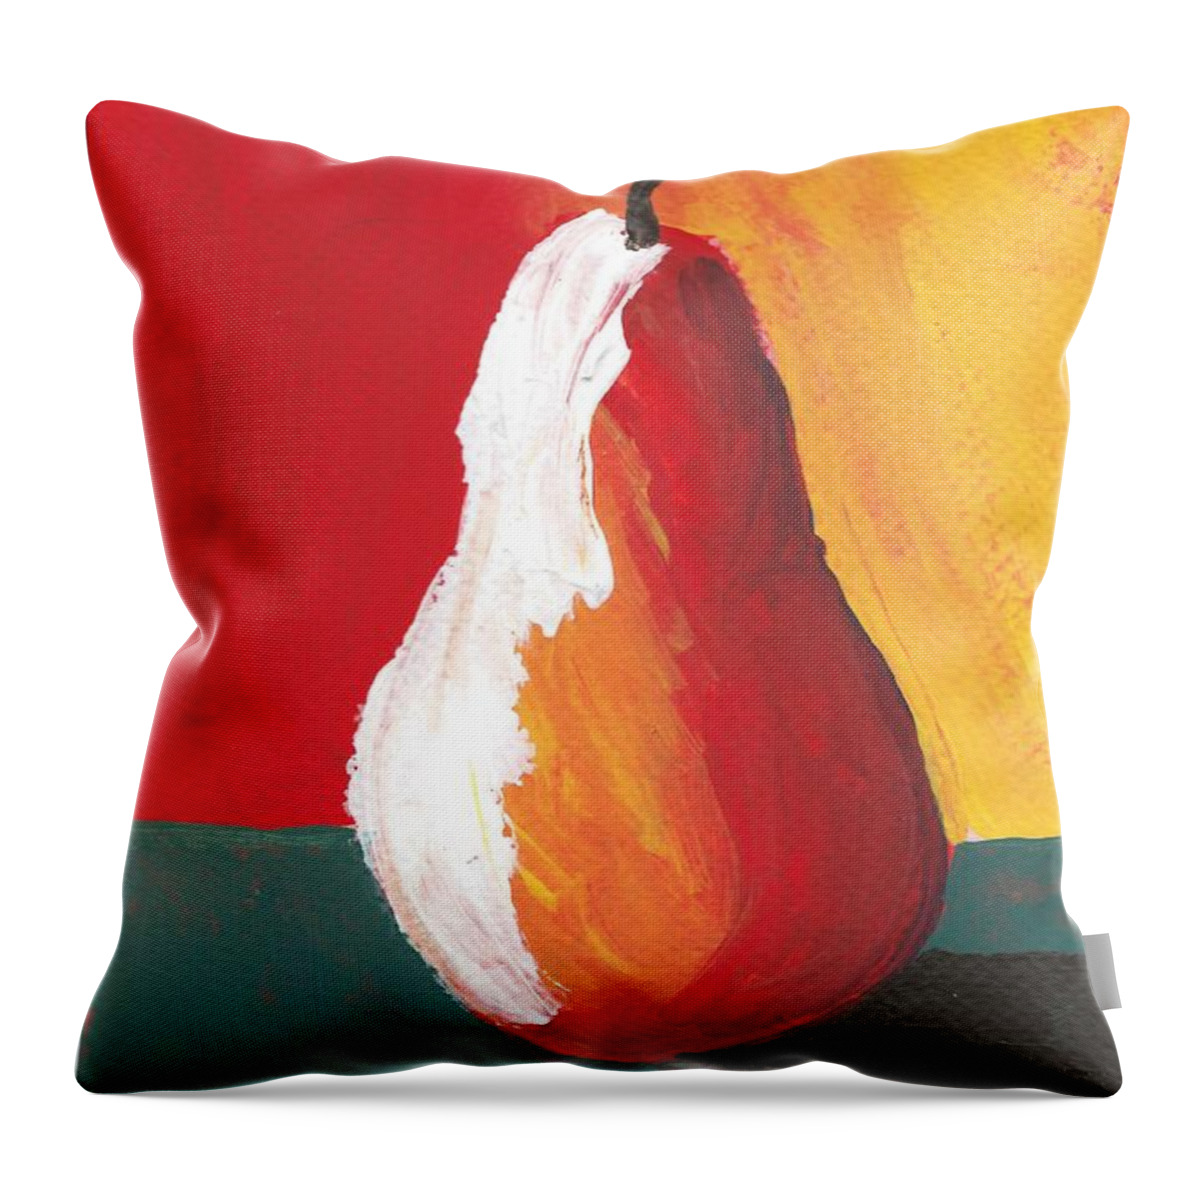 Abstract Pear Throw Pillow featuring the painting Pear 10 by Elise Boam